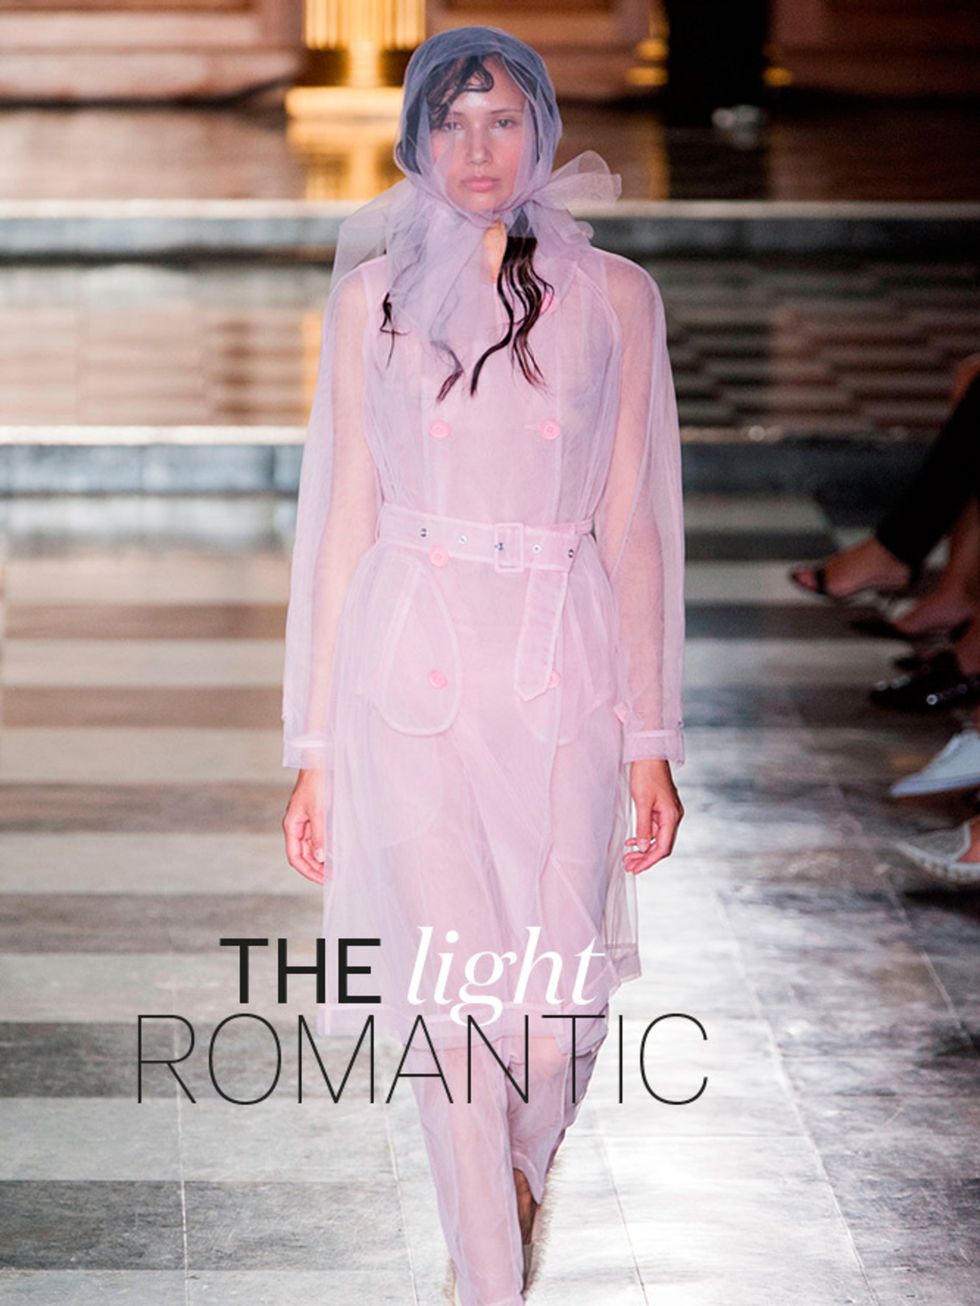 <p>The Light Romantic:<br />
Flowing fabrics, easy, loose-fitting silhouettes and muted pastel shades  come high-summer, this ultra-feminine trend will come into its own.</p>

<p>Simone Rocha s/s 2015</p>